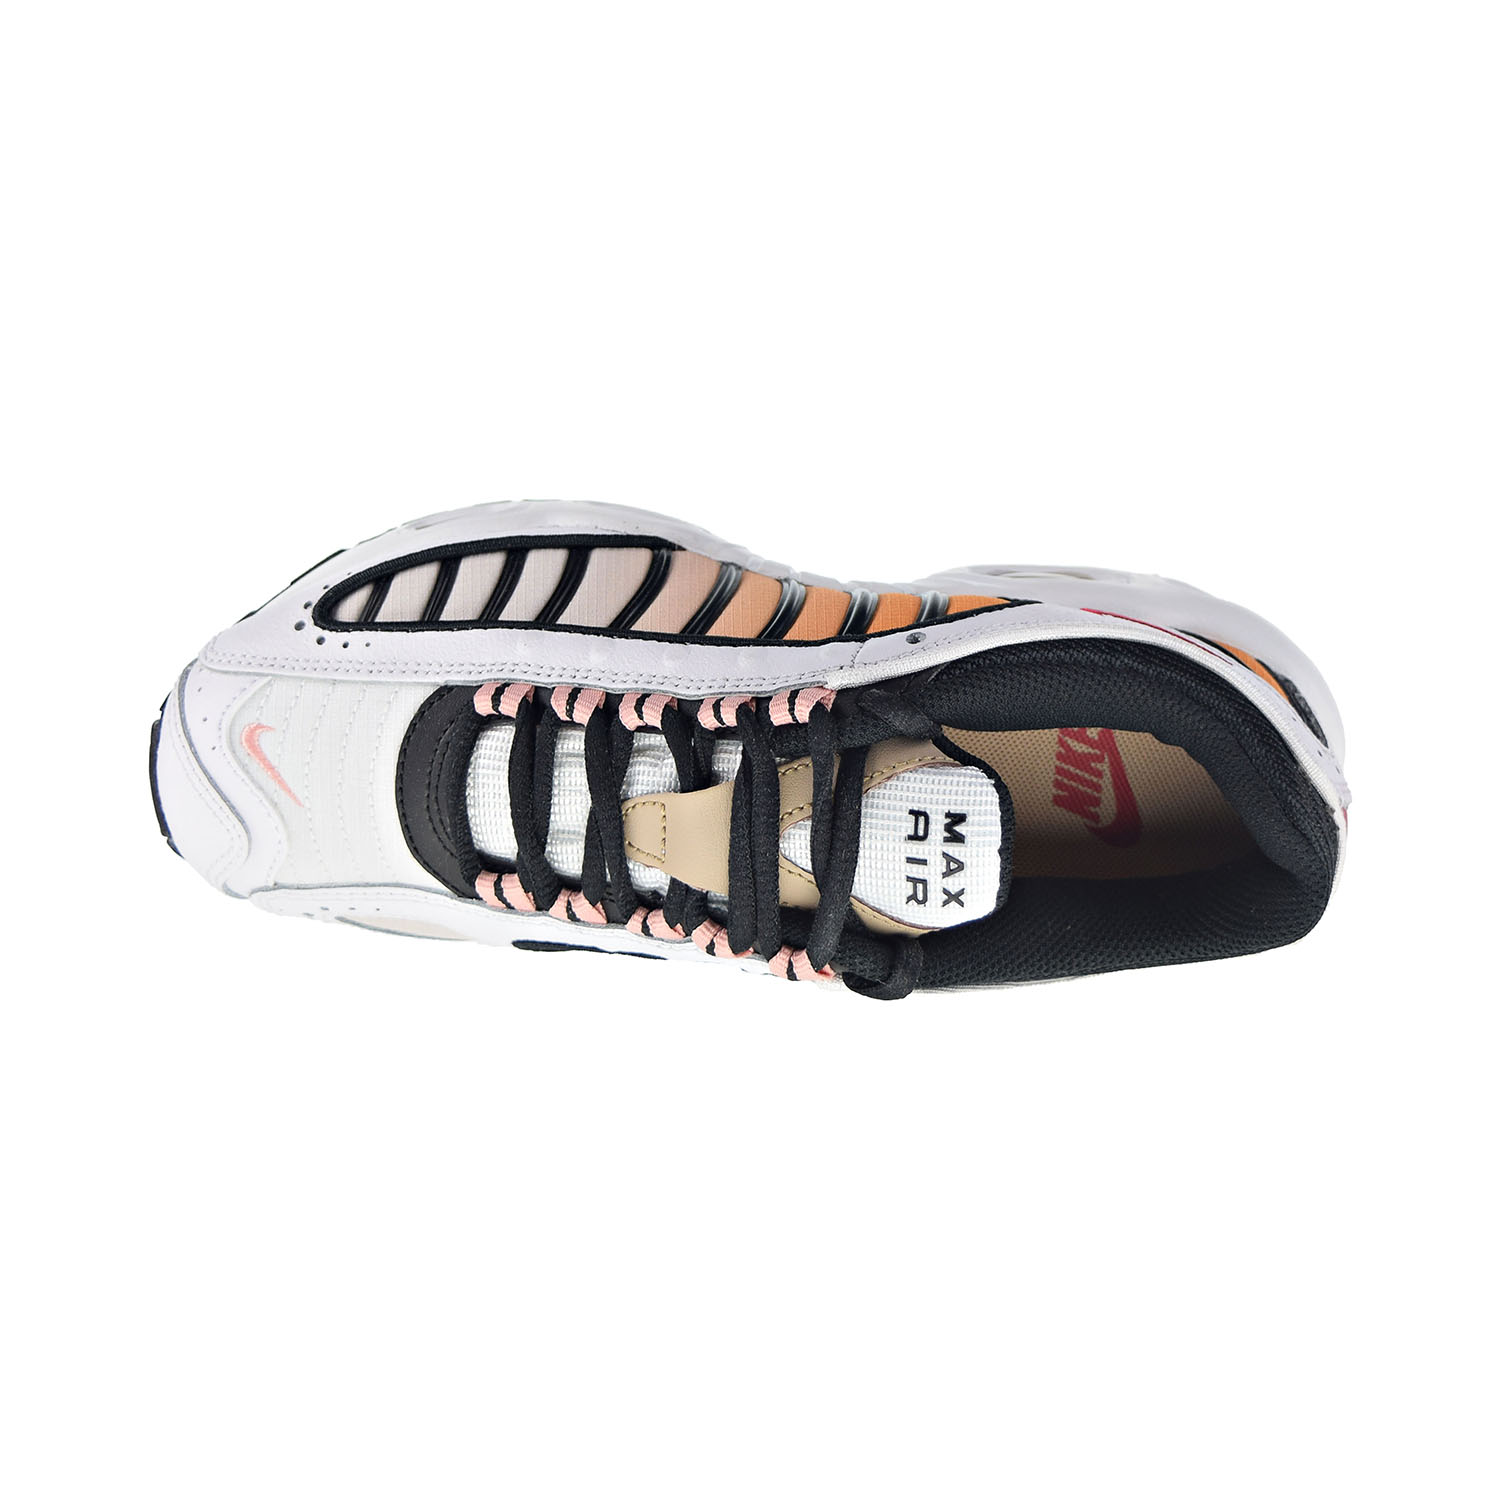 Nike Air Max Tailwind 4 Women's Shoes White-Black-Coral Stardust-Gym Red cj7976-100 - image 5 of 6